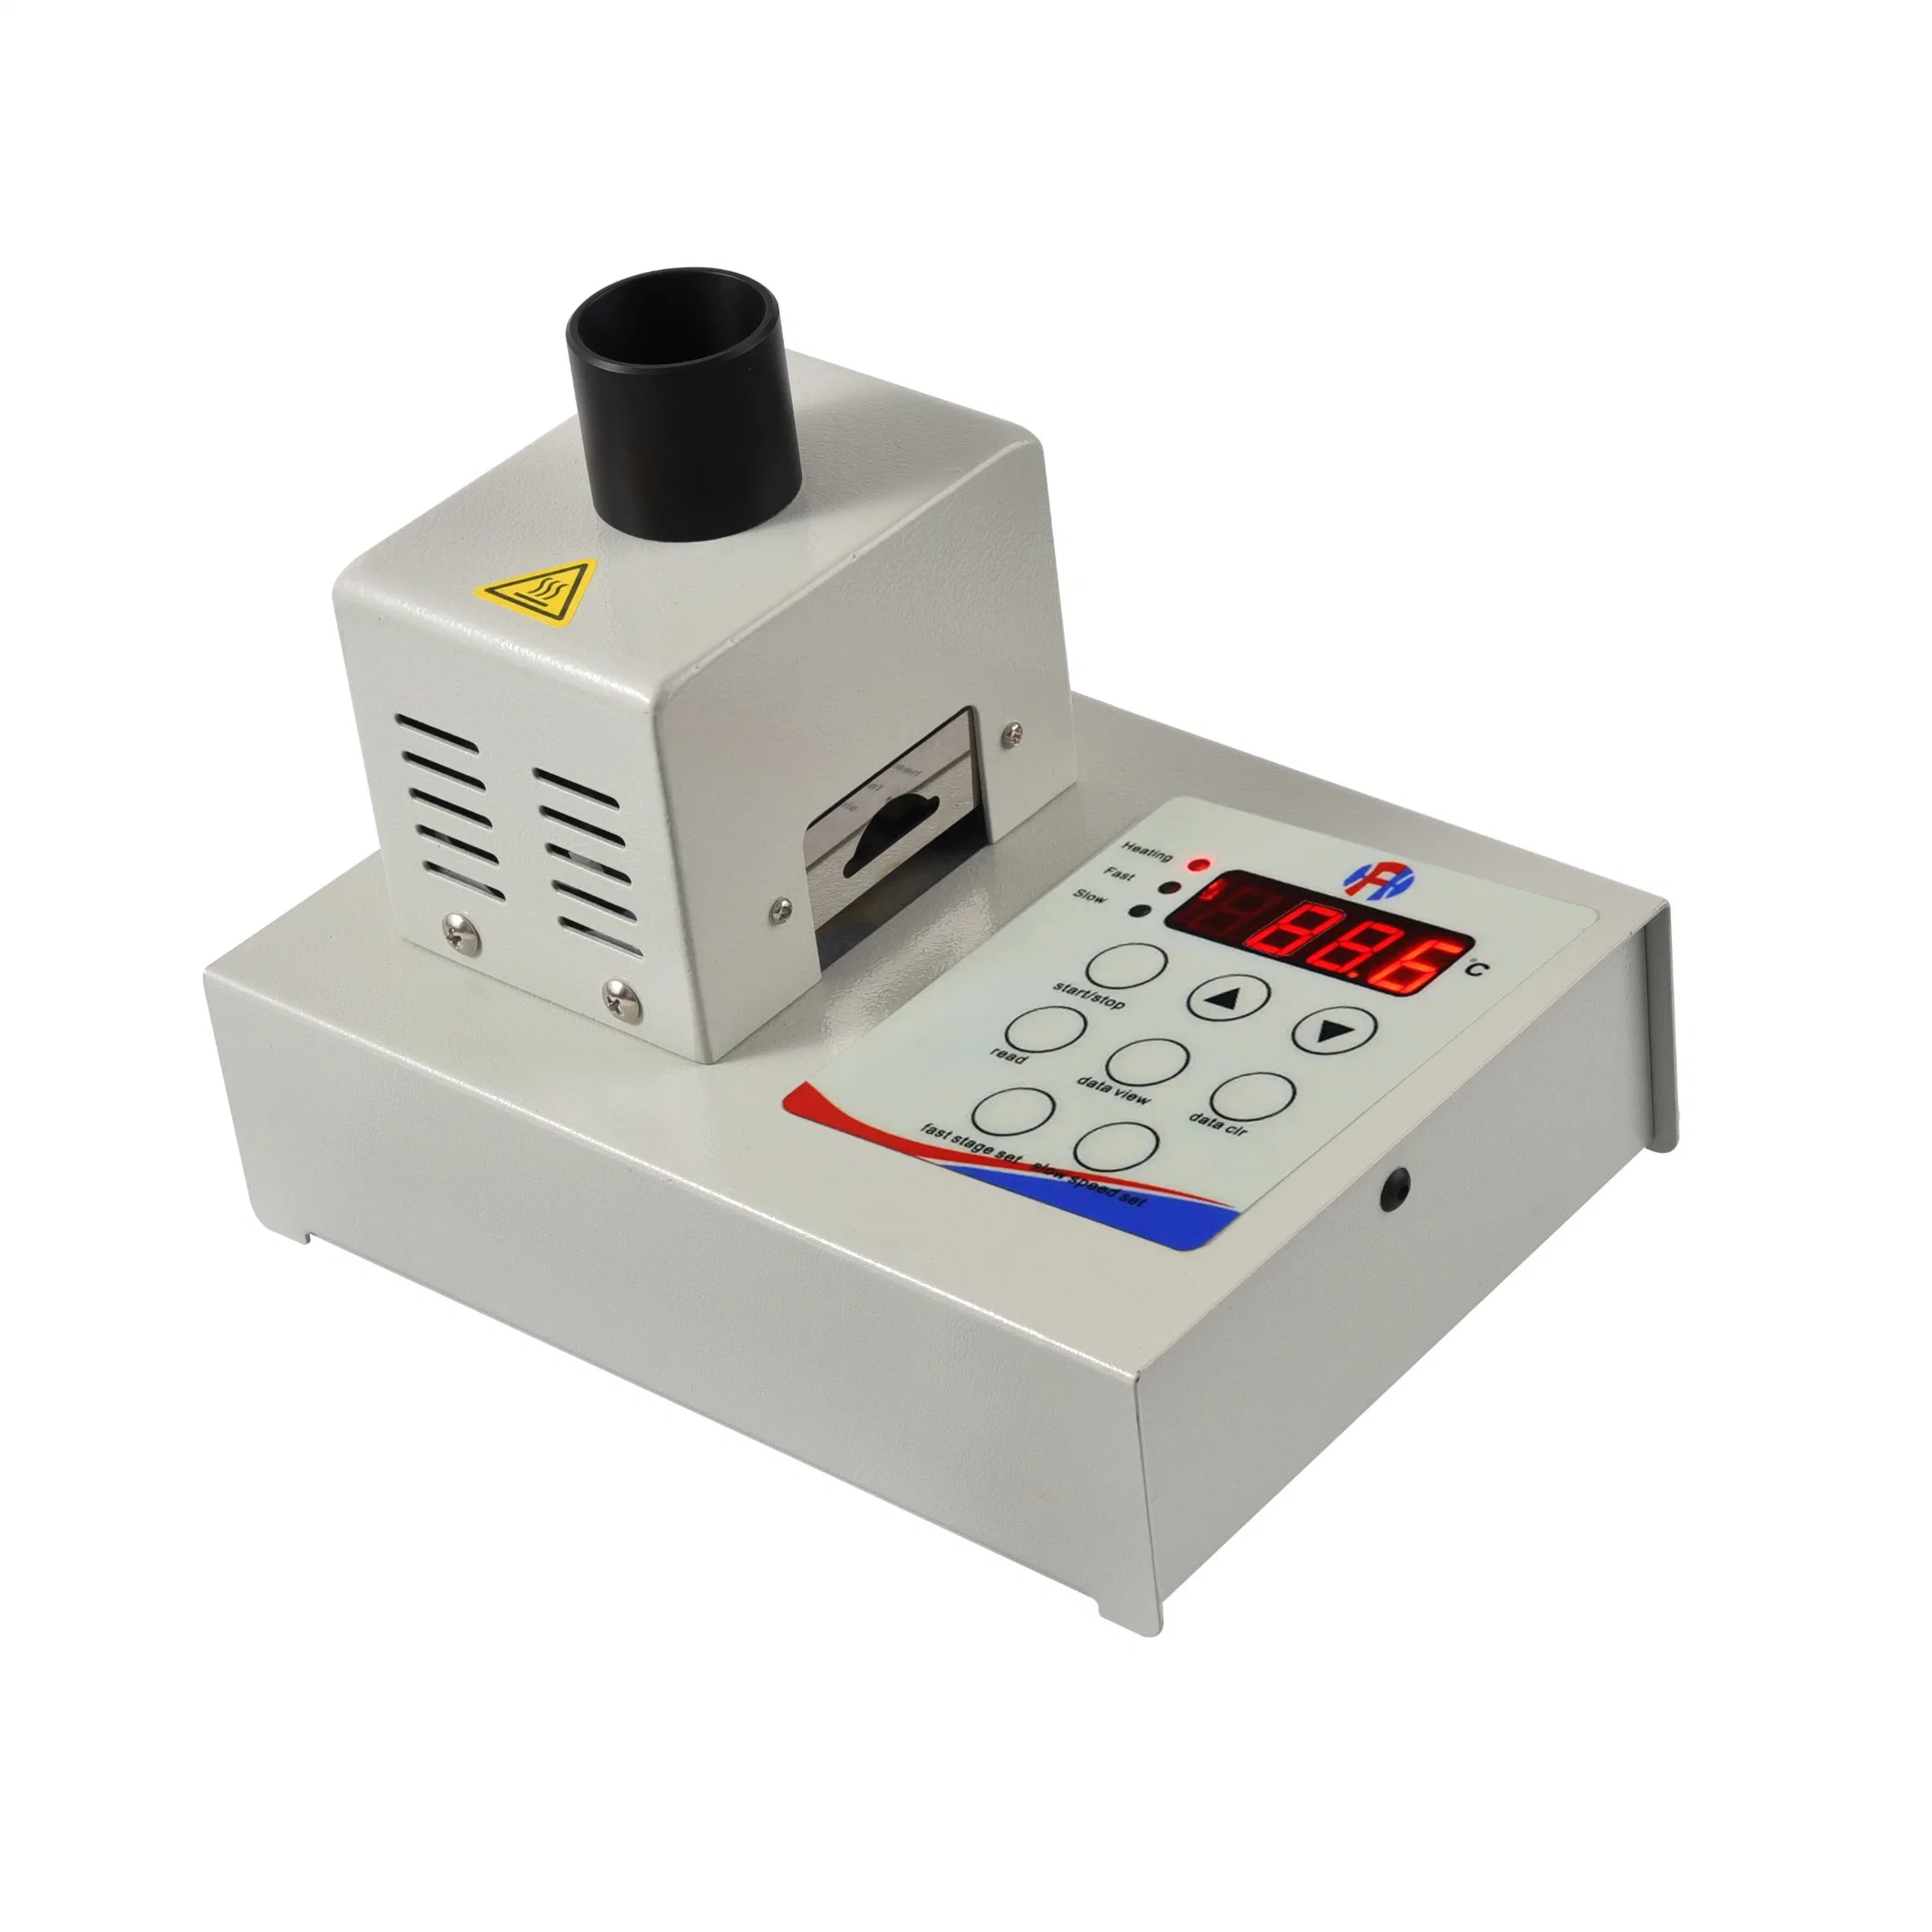 Portable Laboratory Melting Point Apparatus Hmpd-200 New Material Analysis Instrument